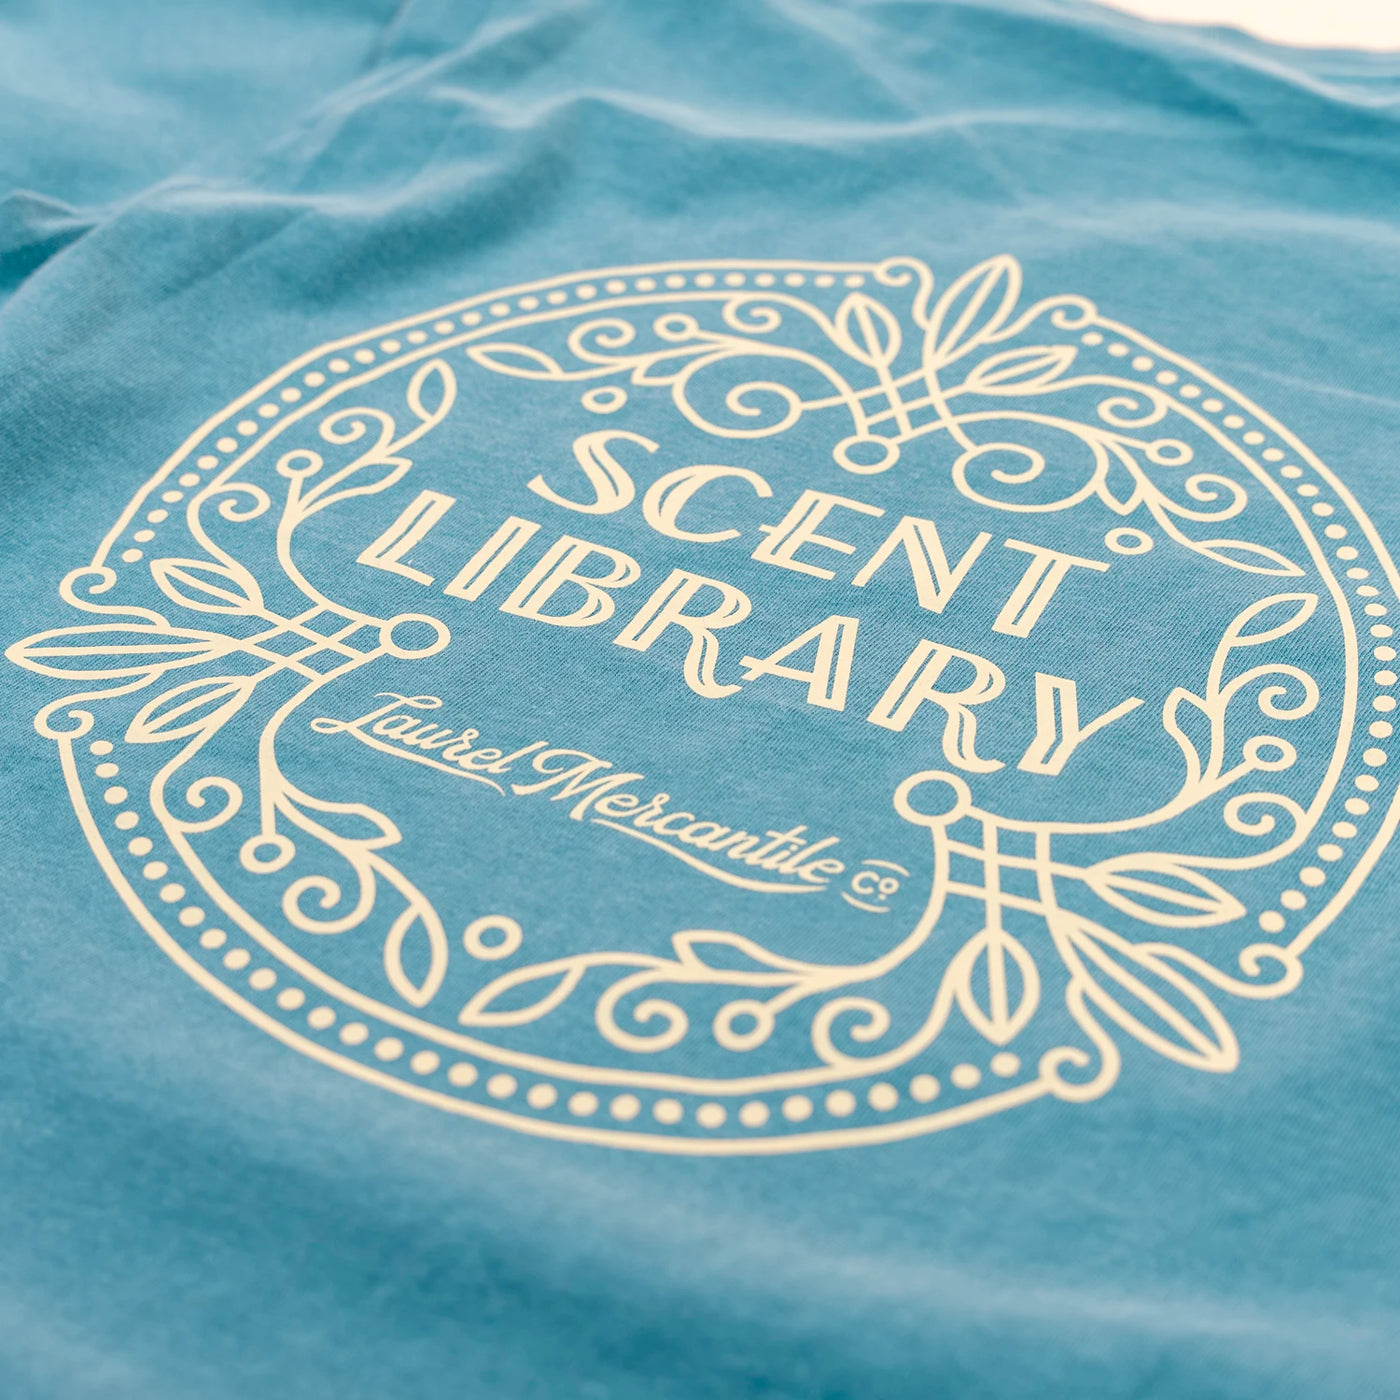 Scent Library Seal T-Shirt